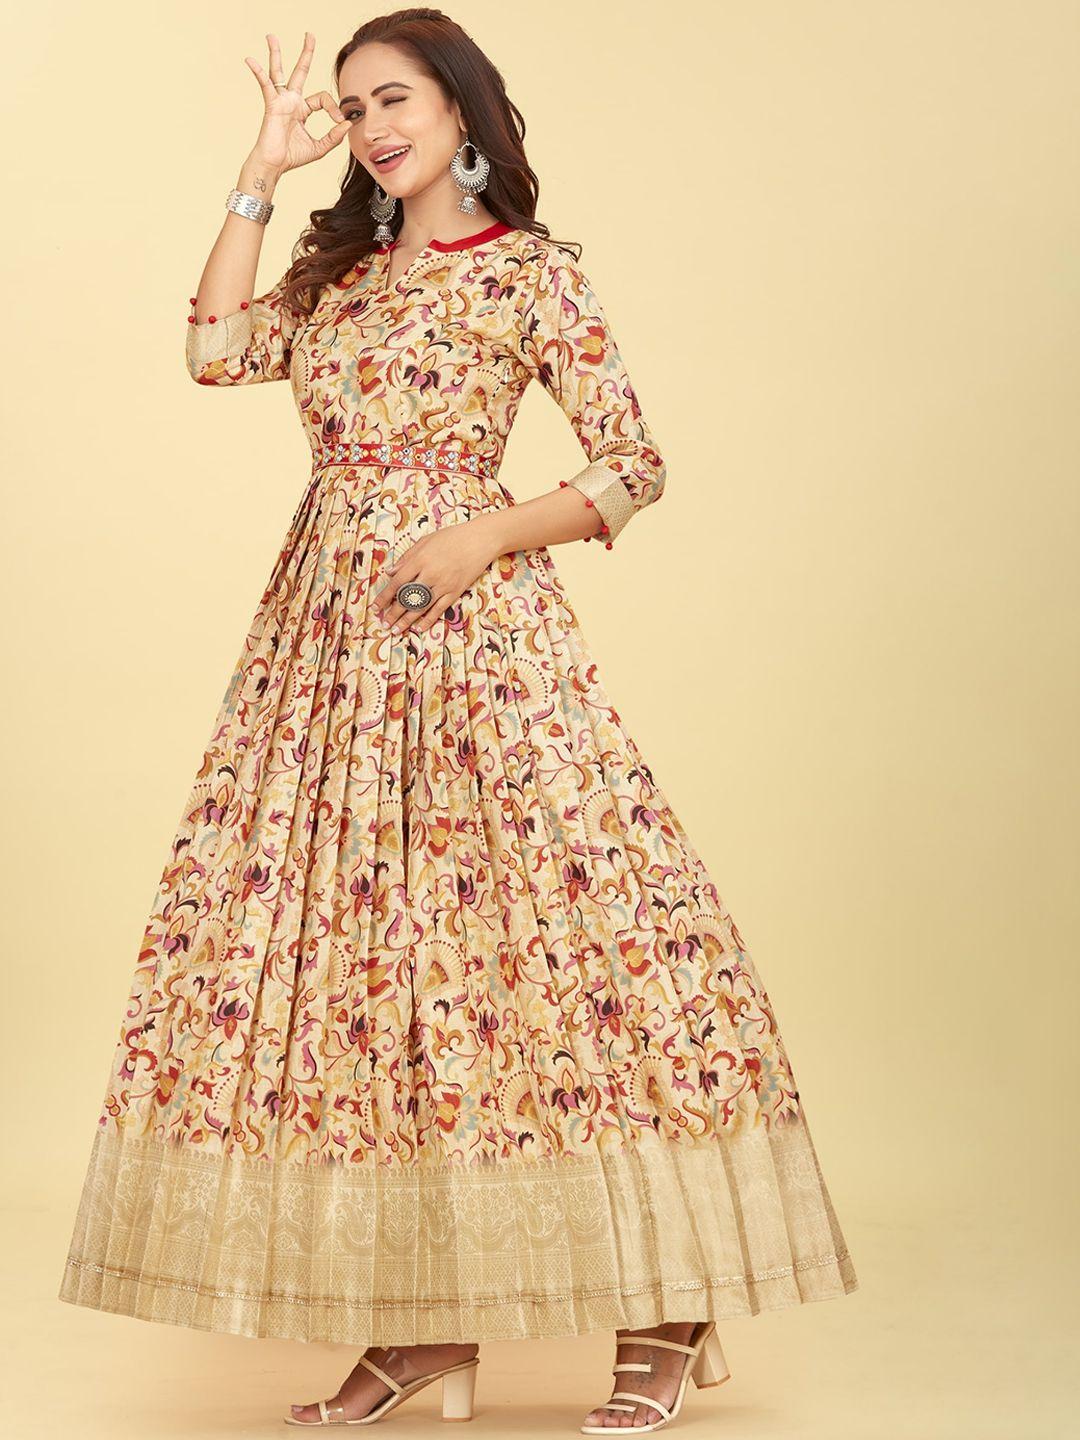 chansi floral printed silk flared ethnic dress comes with a belt